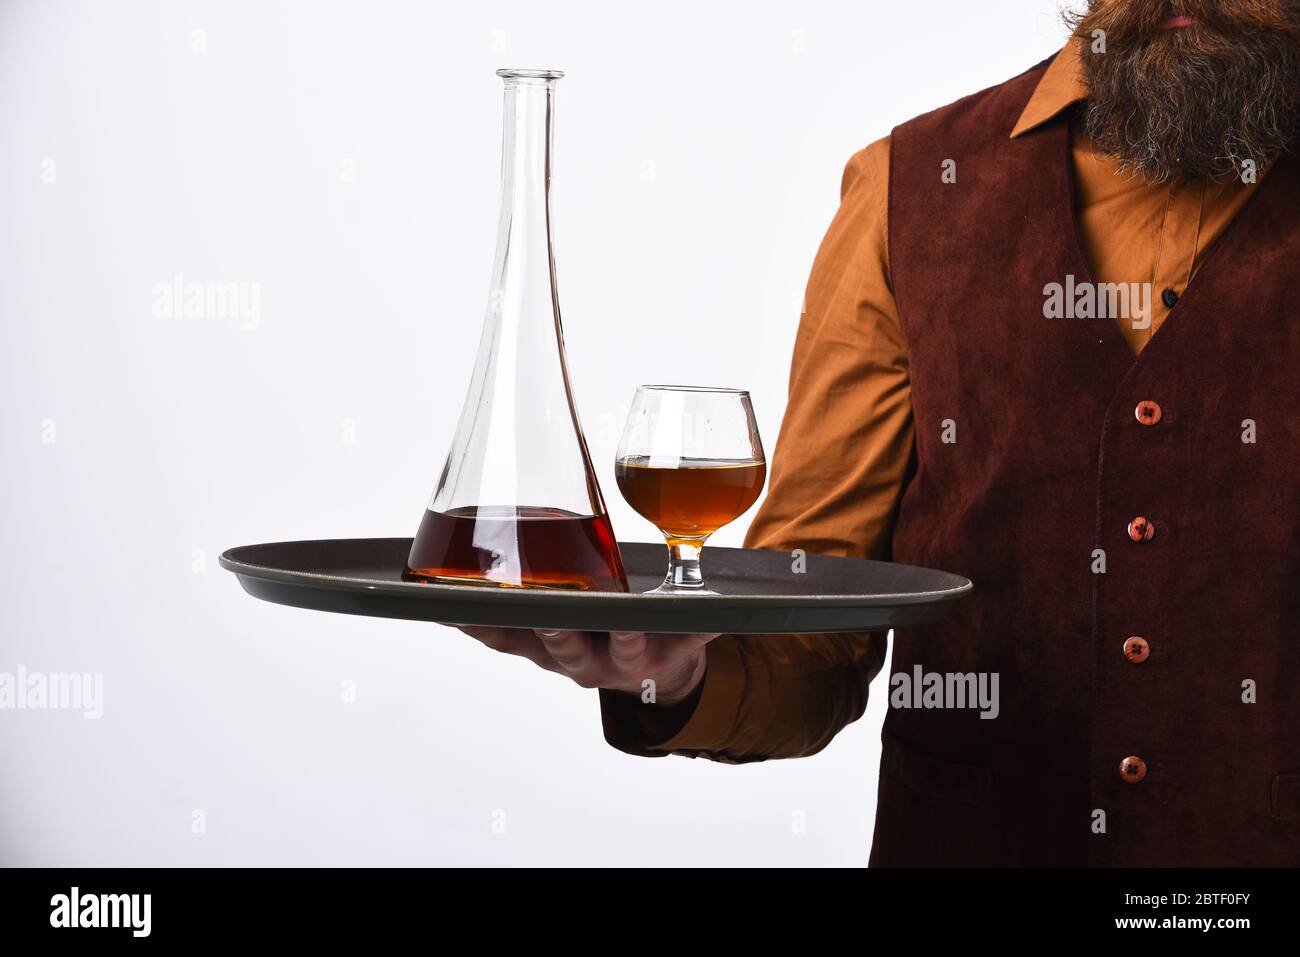 Barman in vintage suede leather waistcoat serves scotch or brandy. Waiter with glass and bottle of whiskey on tray. Restaurant drinks concept. Man with beard holds cognac on white background. Stock Photo